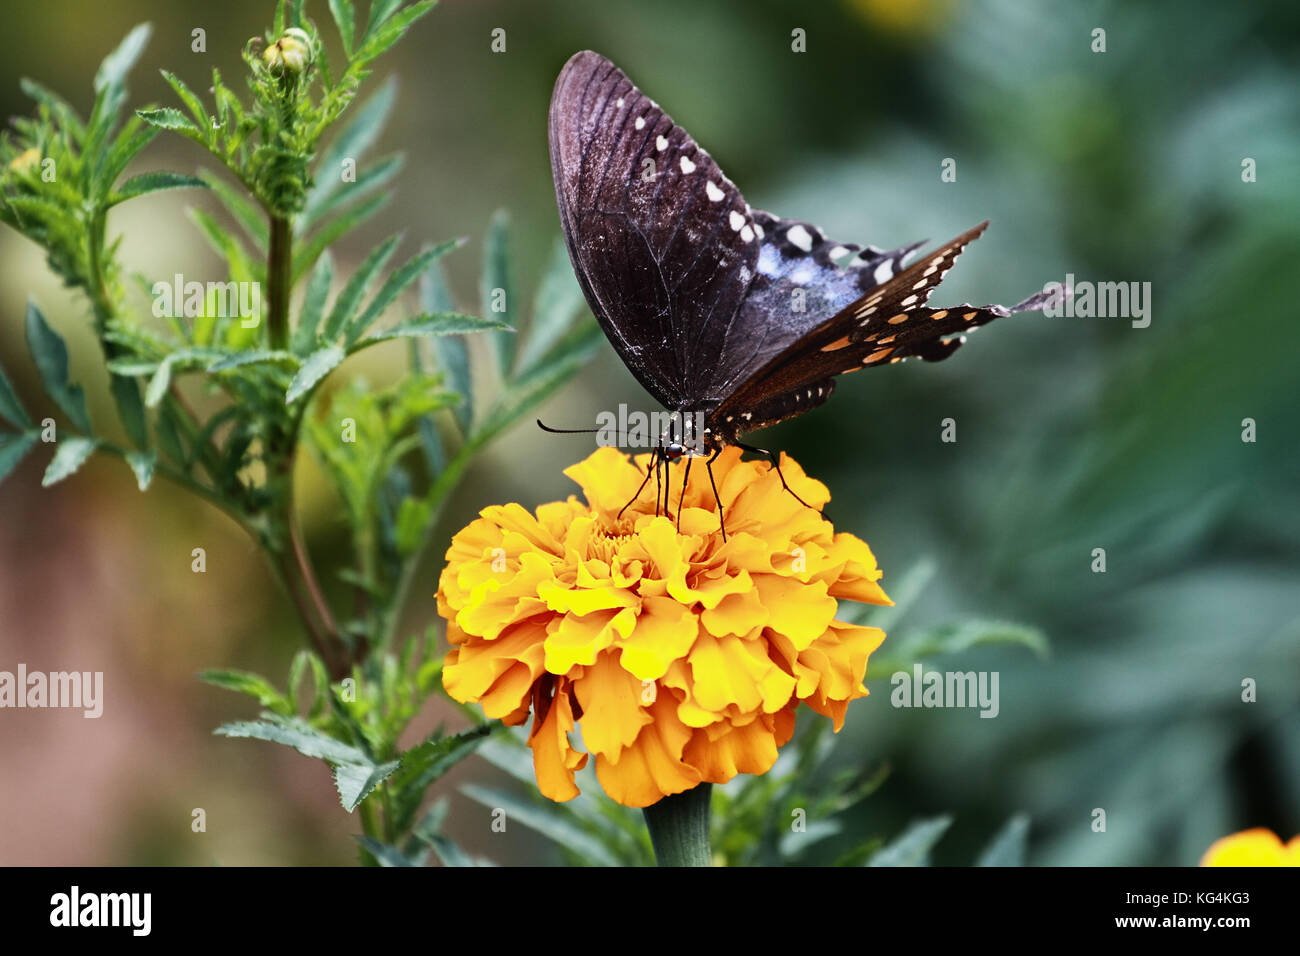 A Spicebush Swallowtail (Papilio polyxenes) Butterfly feeding from an orange marigold flower in the summer sun. Stock Photo